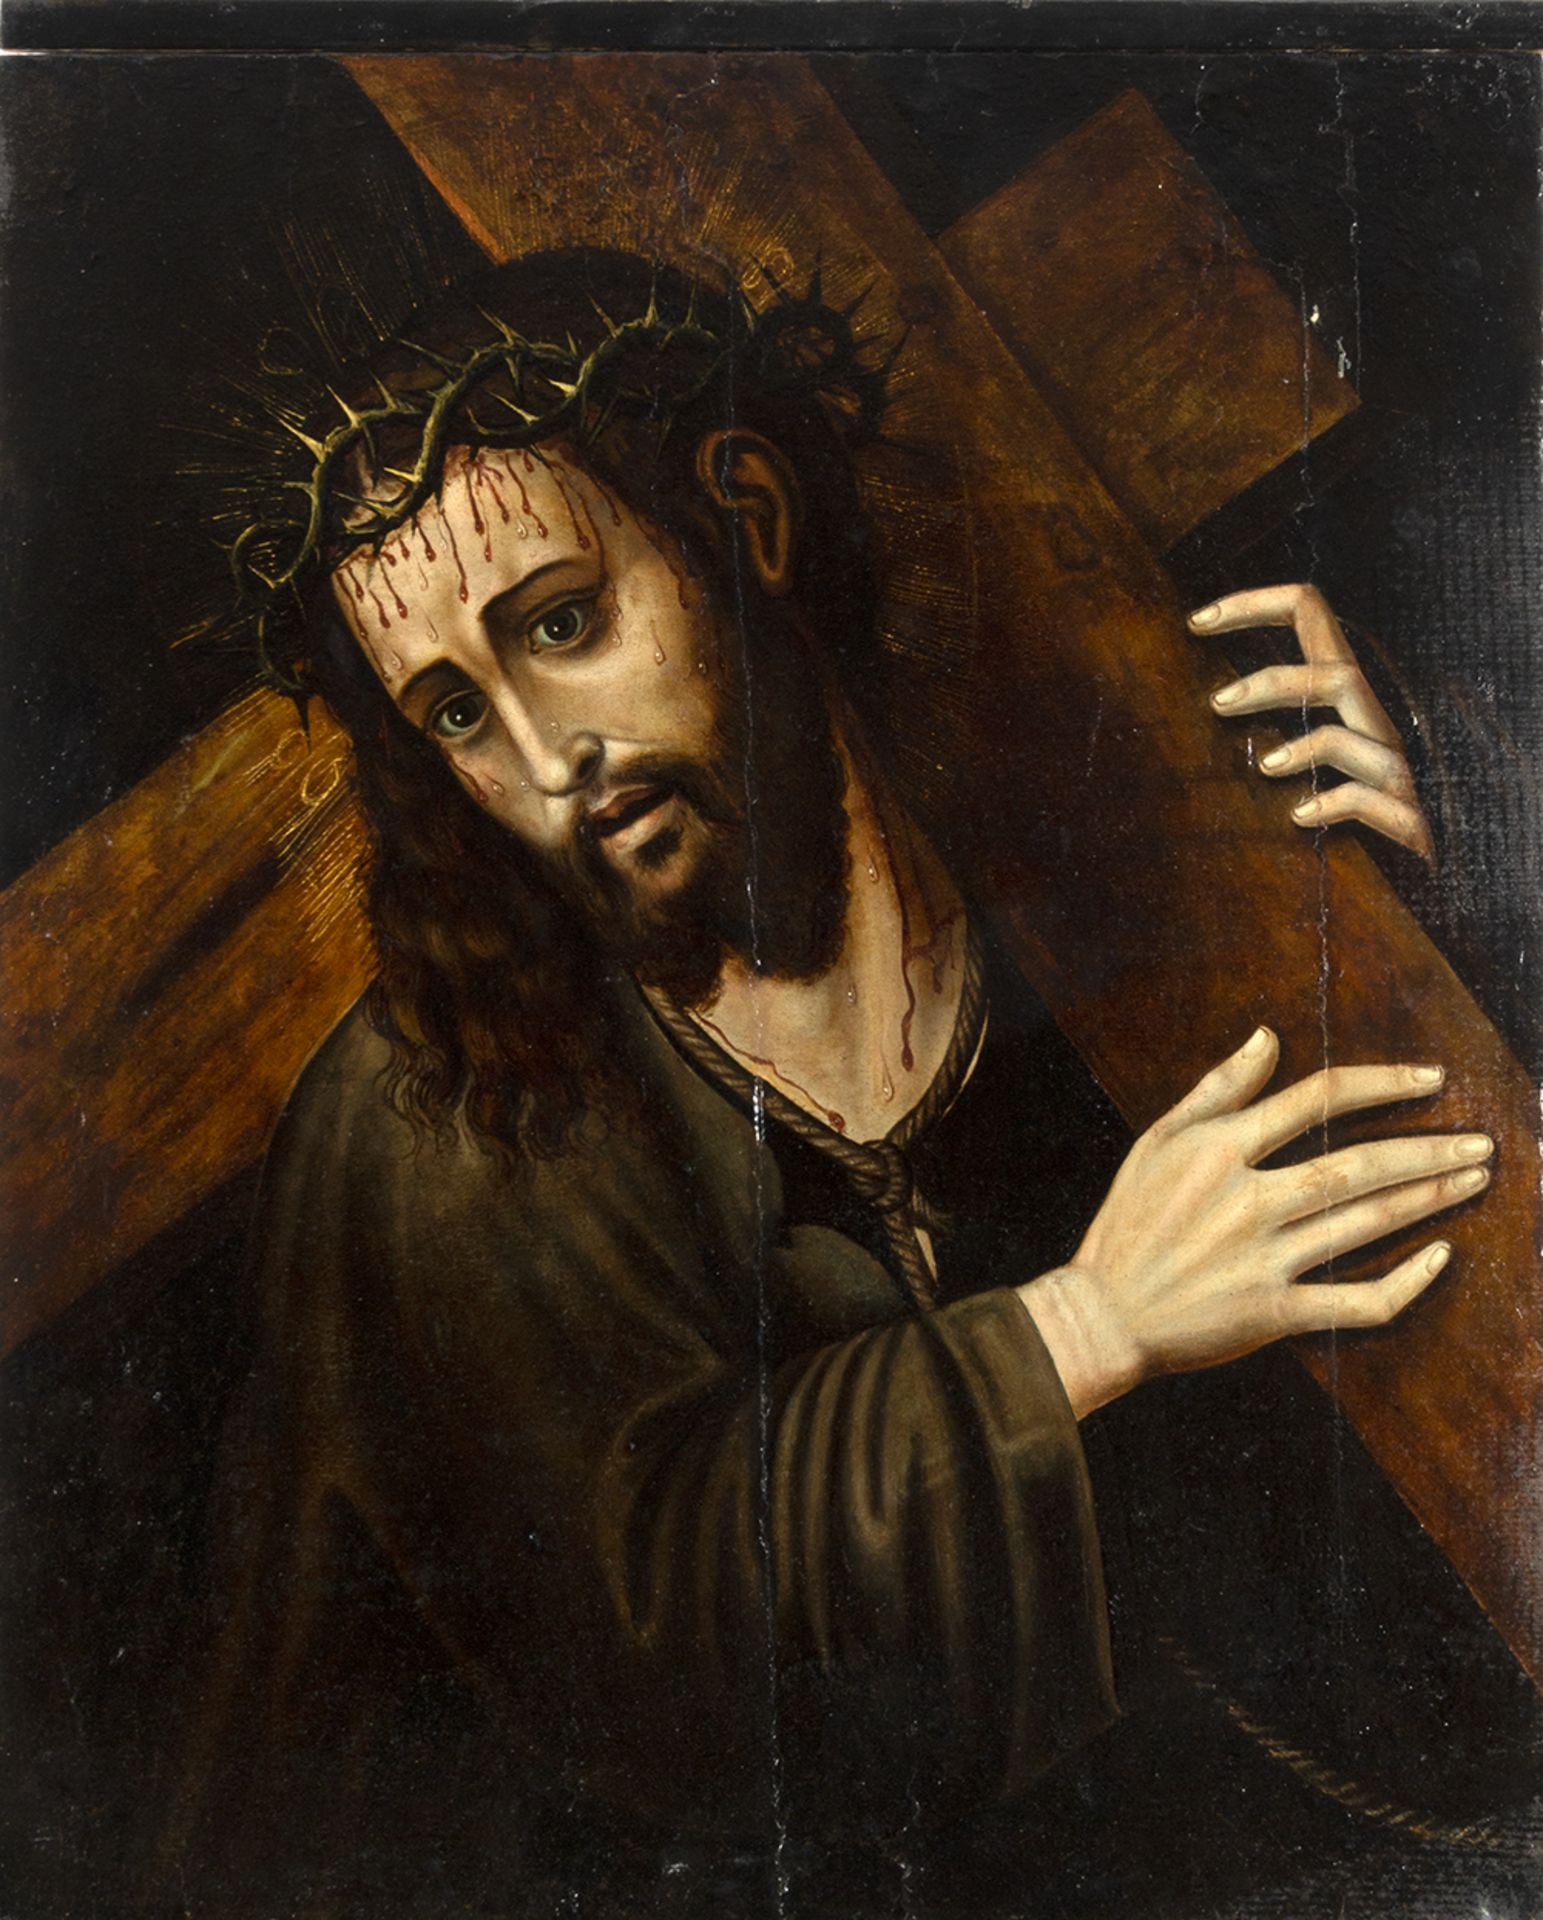 Spanish school of the 16th century. Christ carrying the cross.